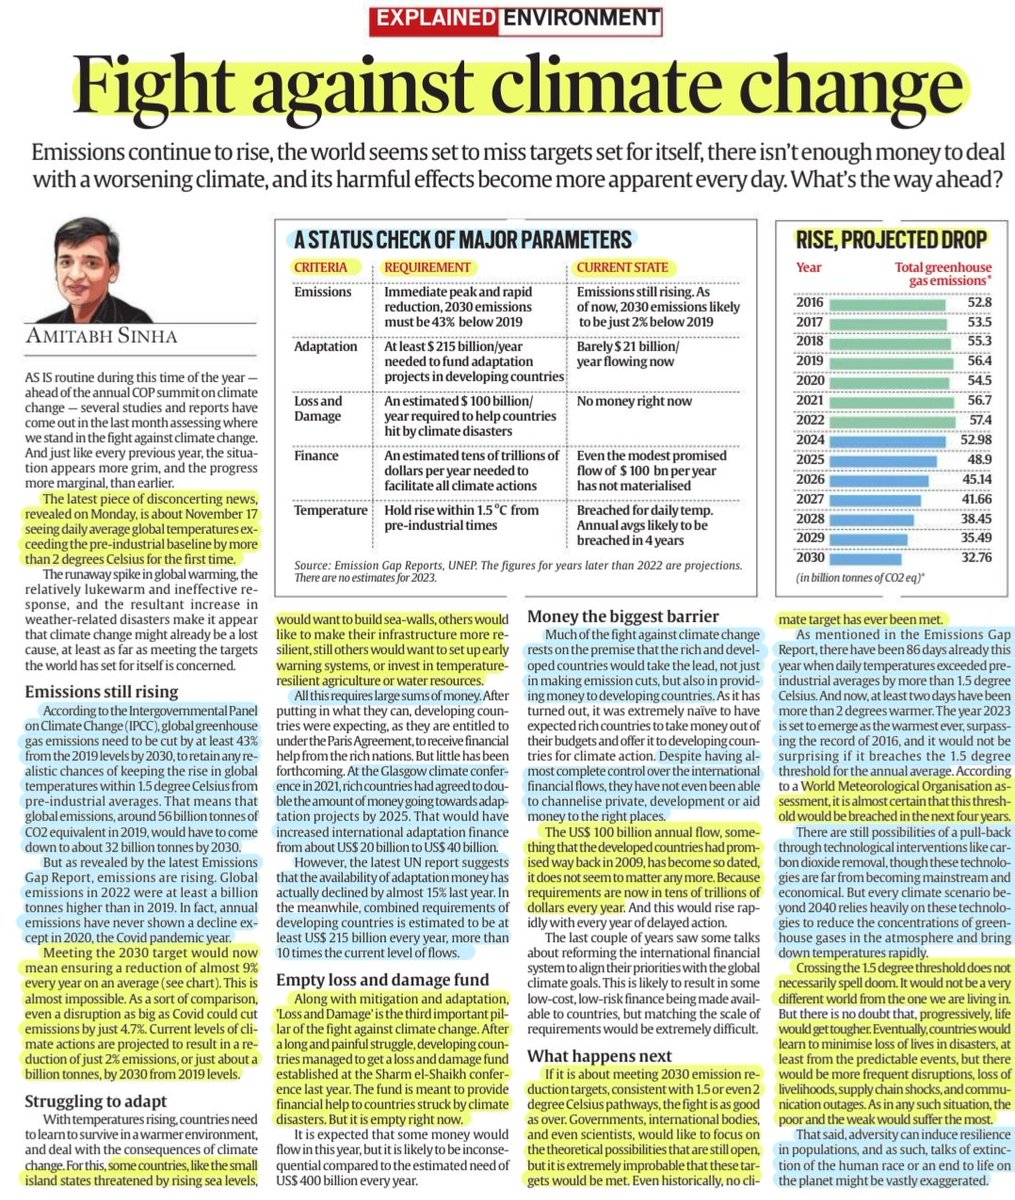 'Fight against Climate Change'
:Well explaind by Sh Amitabh Sinha
Details:#EmissionsGap report,
#emissions 📈,#GlobalWarming #ClimateFinance 📉 #LossAndDamage #Adaptation, the future &More info..

#ClimateCrisis #ClimateFight
#GlobalGoals
#ClimateAction
#COP28 

#UPSC

Source: IE